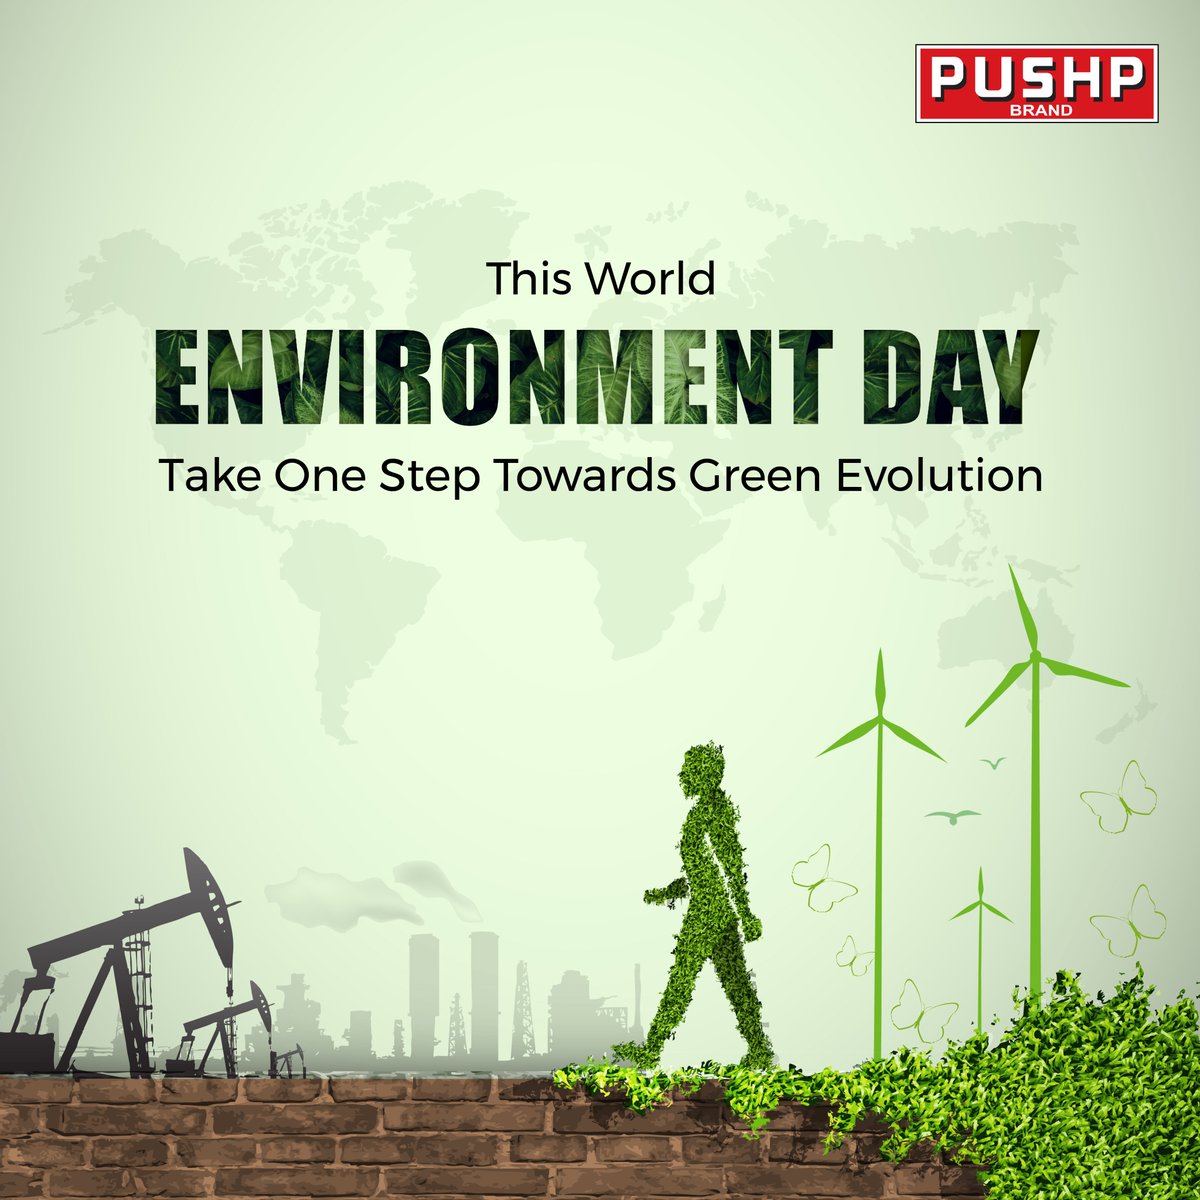 ✨ Let's savour the flavours of nature and protect our #Environment together!
.
.
.
#WorldEnvironmentDay #enviroment #pushp #awareness #healthy #livehealthy #environmentday #swadkasuperstar #green #evolution #pushpmasale #purespices #spices #pushpbrandindia #green #nature